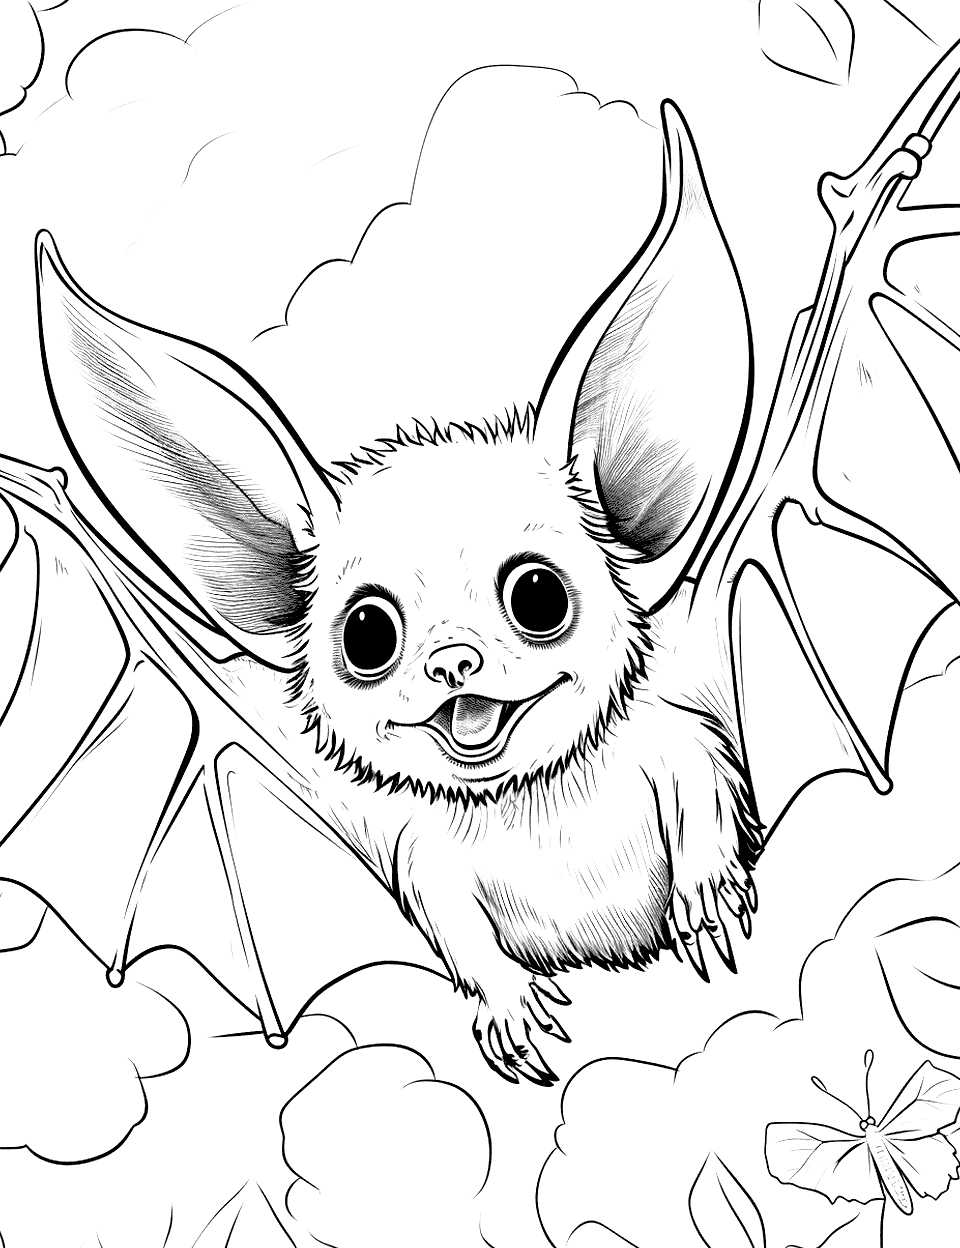 Detailed Bat Portrait Coloring Page - A close-up of a bat’s face with attention to fur and facial features.